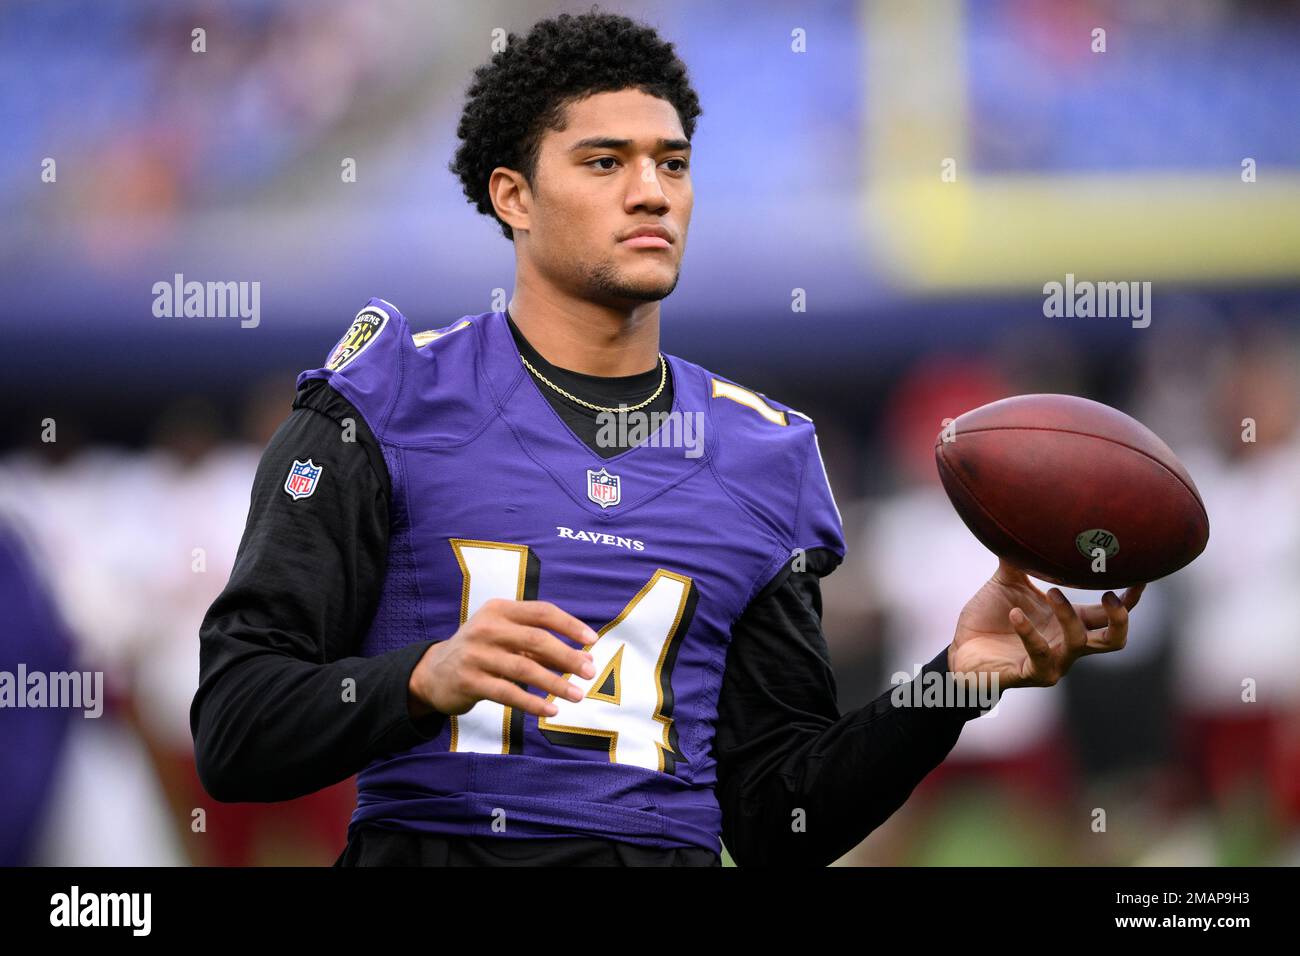 Baltimore Ravens safety Kyle Hamilton (14) looks on before a preseason NFL  football game against the Washington Commanders, Saturday, Aug. 27, 2022,  in Baltimore. (AP Photo/Nick Wass Stock Photo - Alamy